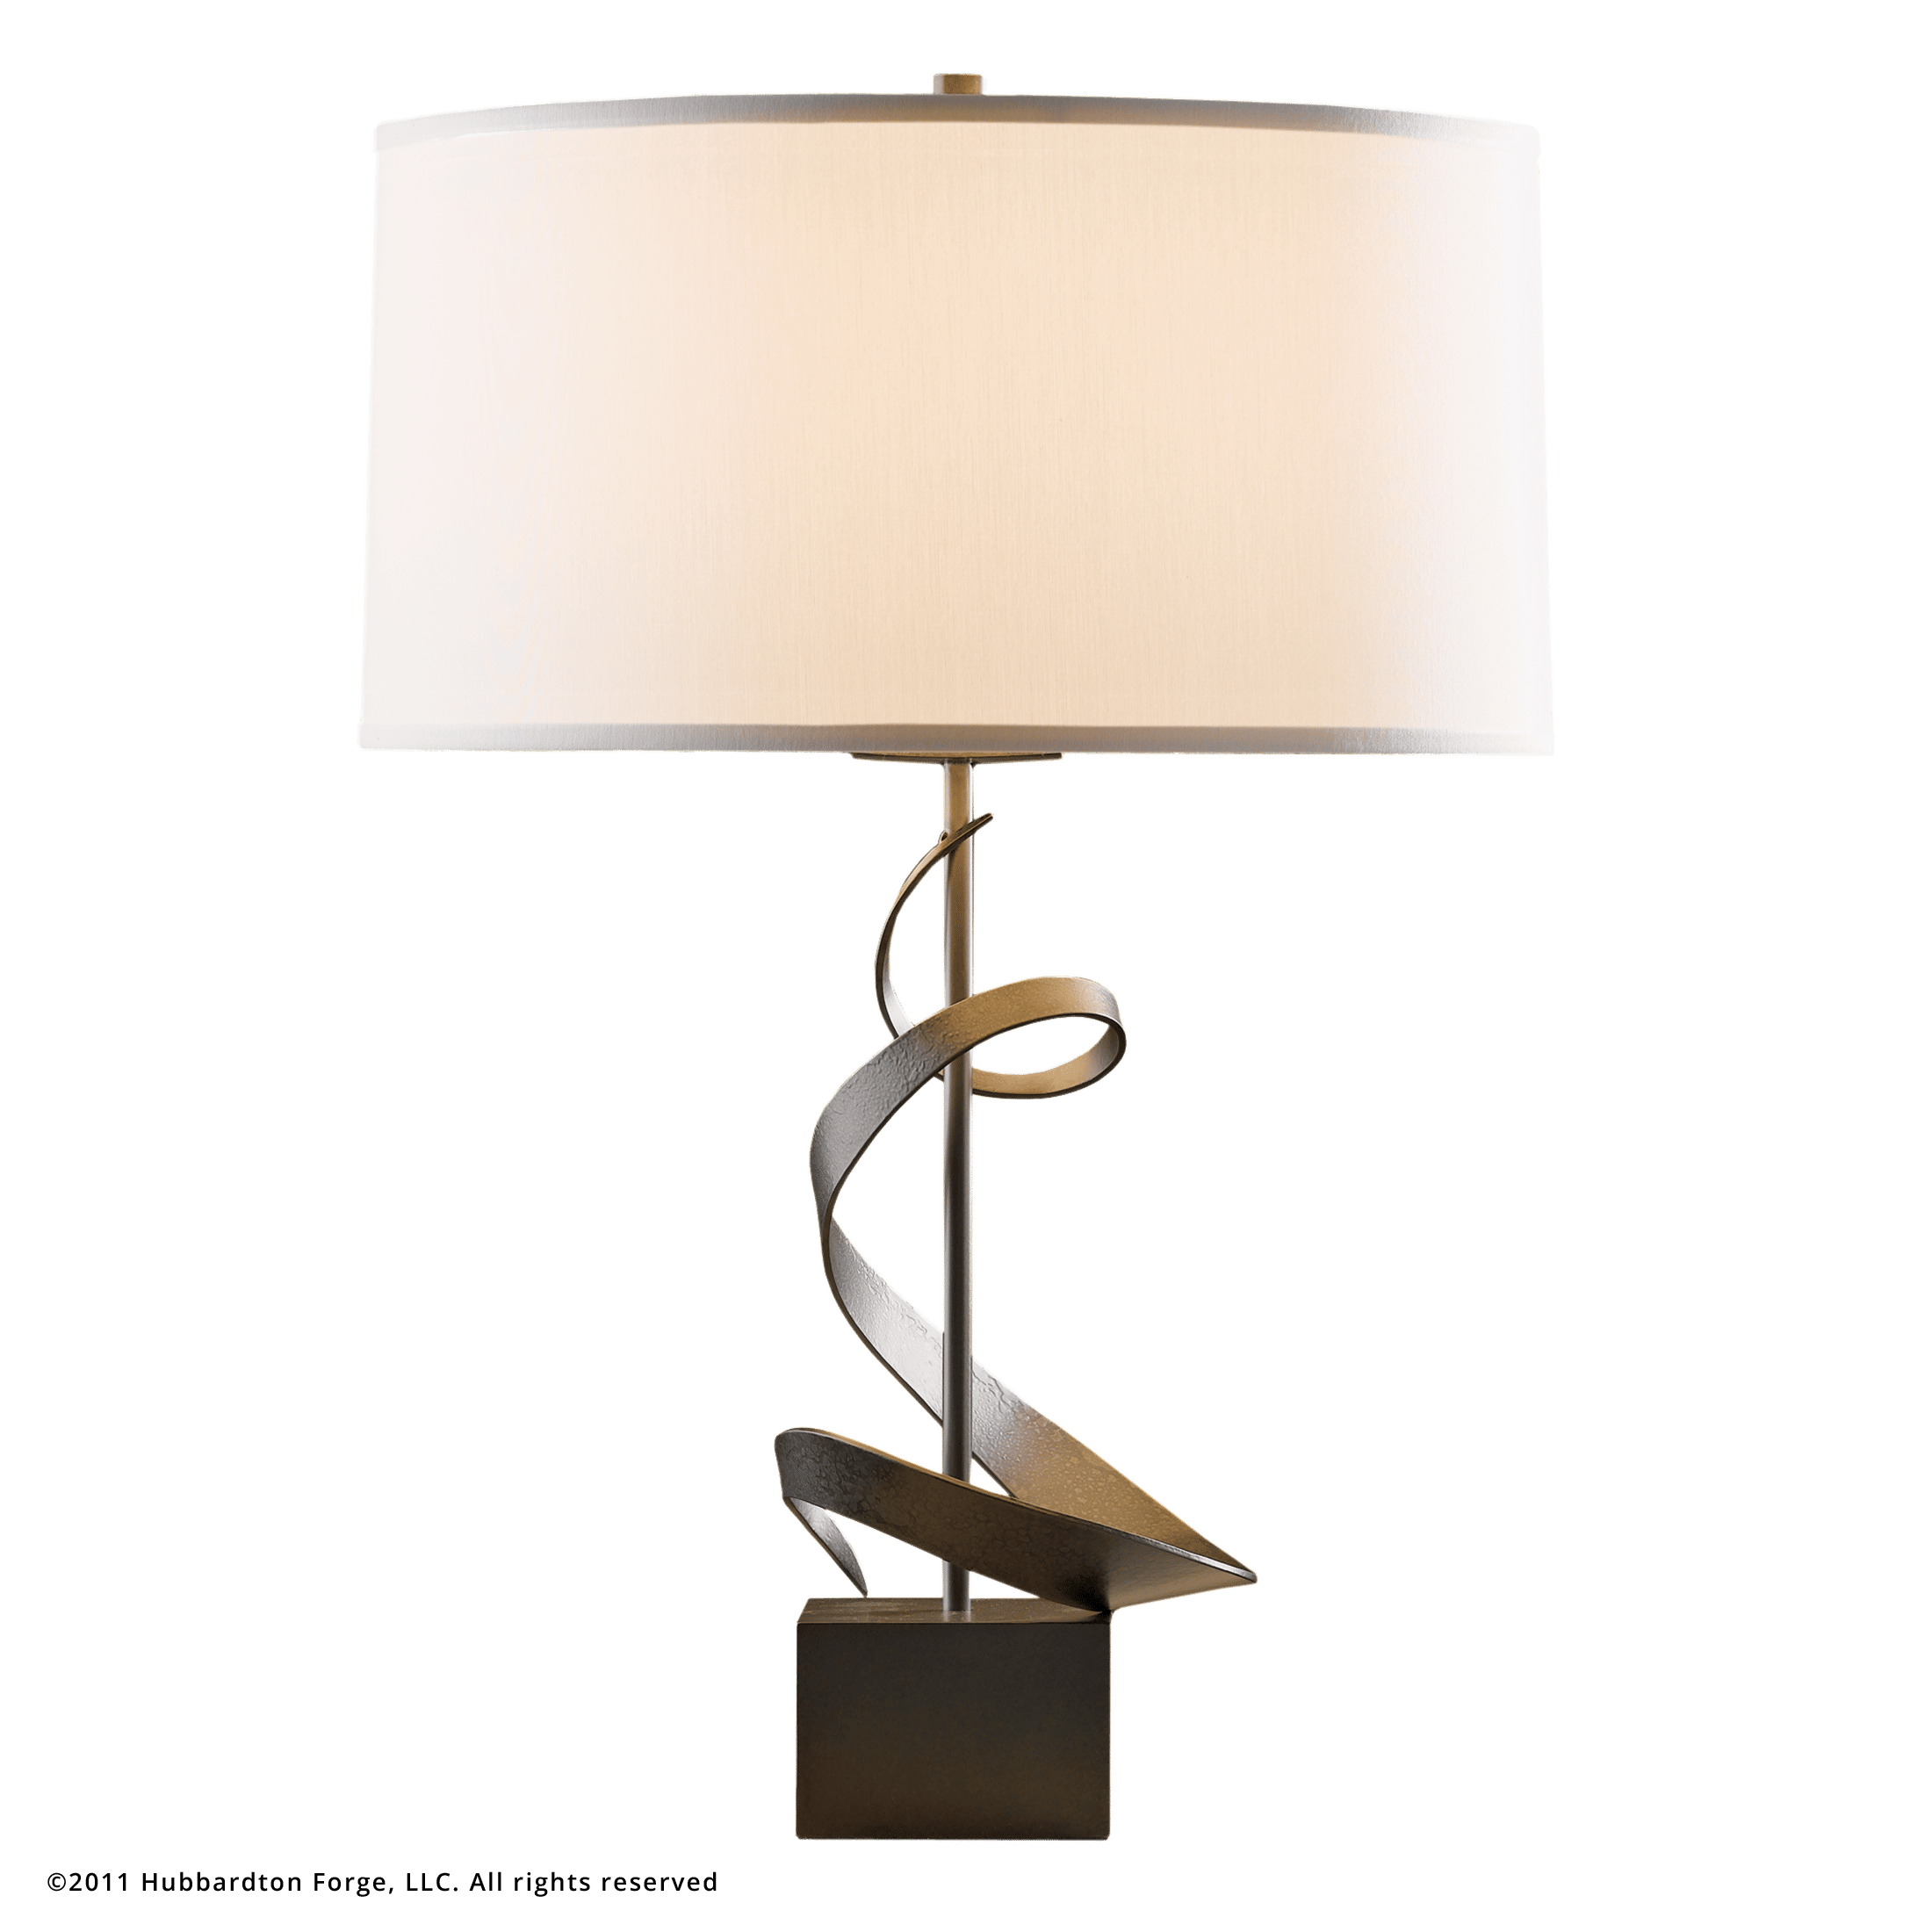 Grandview Gallery Table Lamp with Laser Cut Shade – Laser Cut Tree Scene  with Sparkle White Lamp Shade and Brushed Nickel Body, 27.25” Table Lamp  for Bedside, End Tables and More 